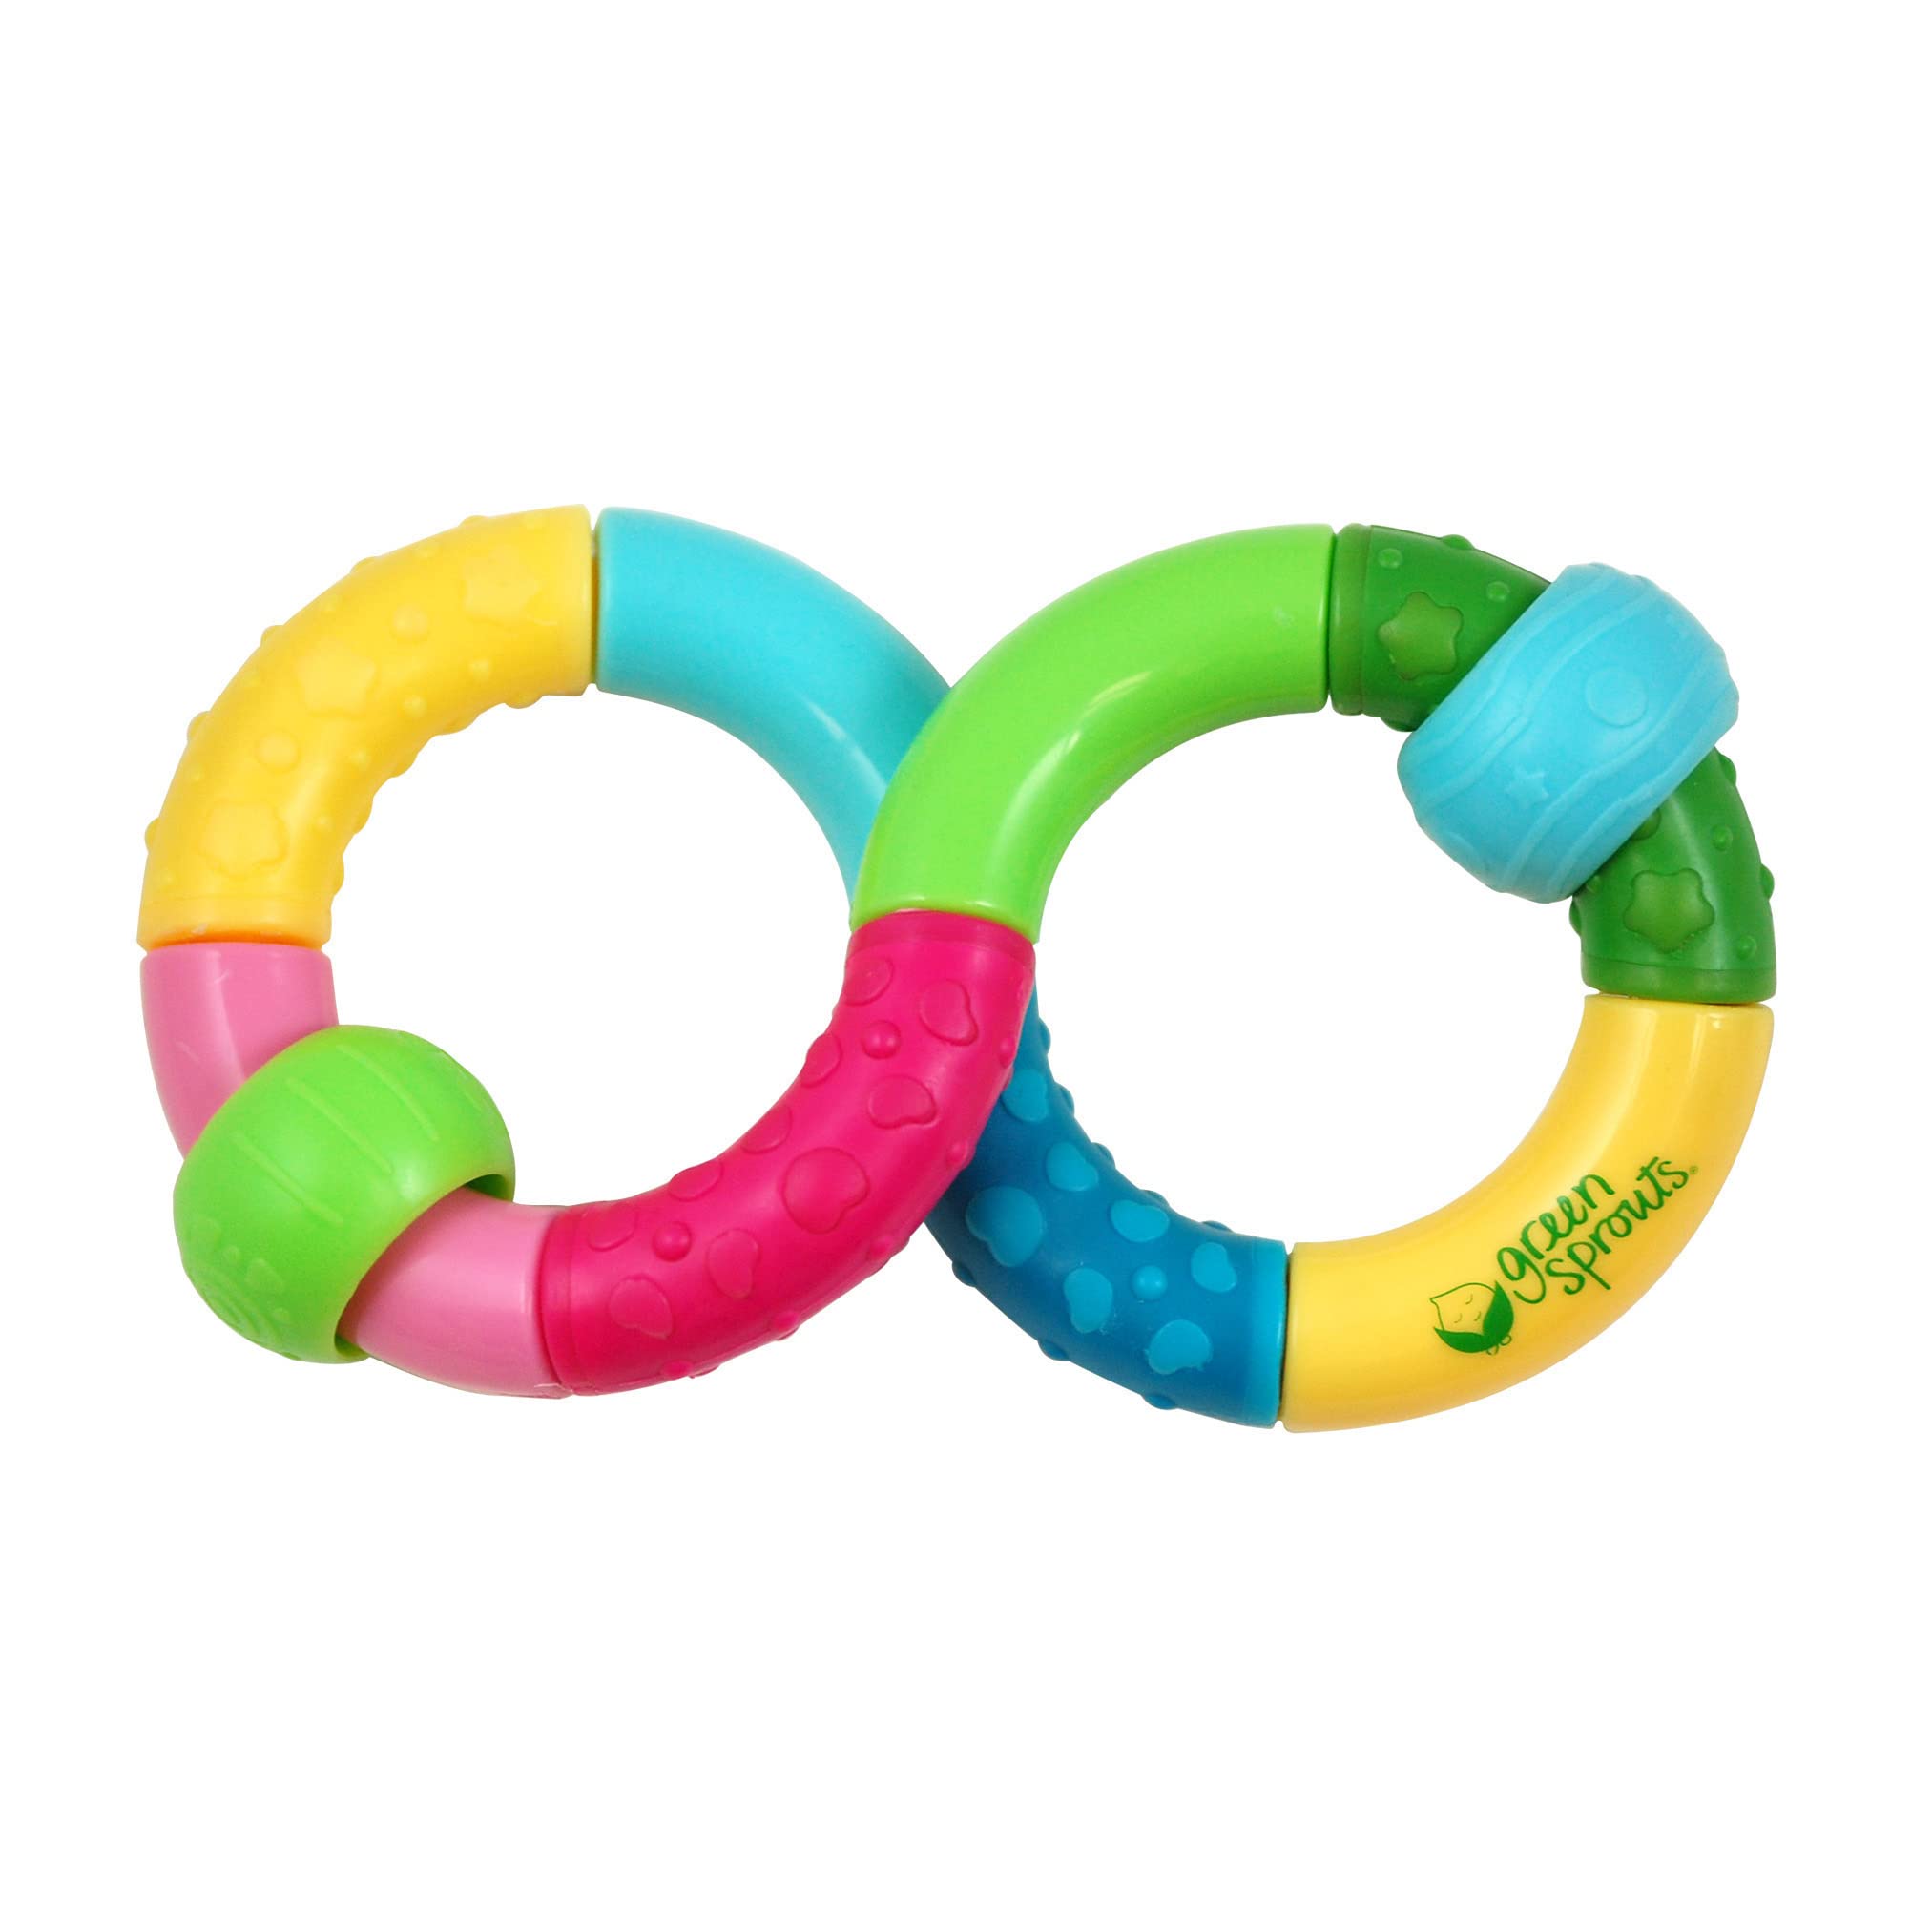 Book Cover green sprouts Infinity Rattle | Encourages whole learning | Durable material made from safer plastic, Easy to hold & shake, Playful rattle sound